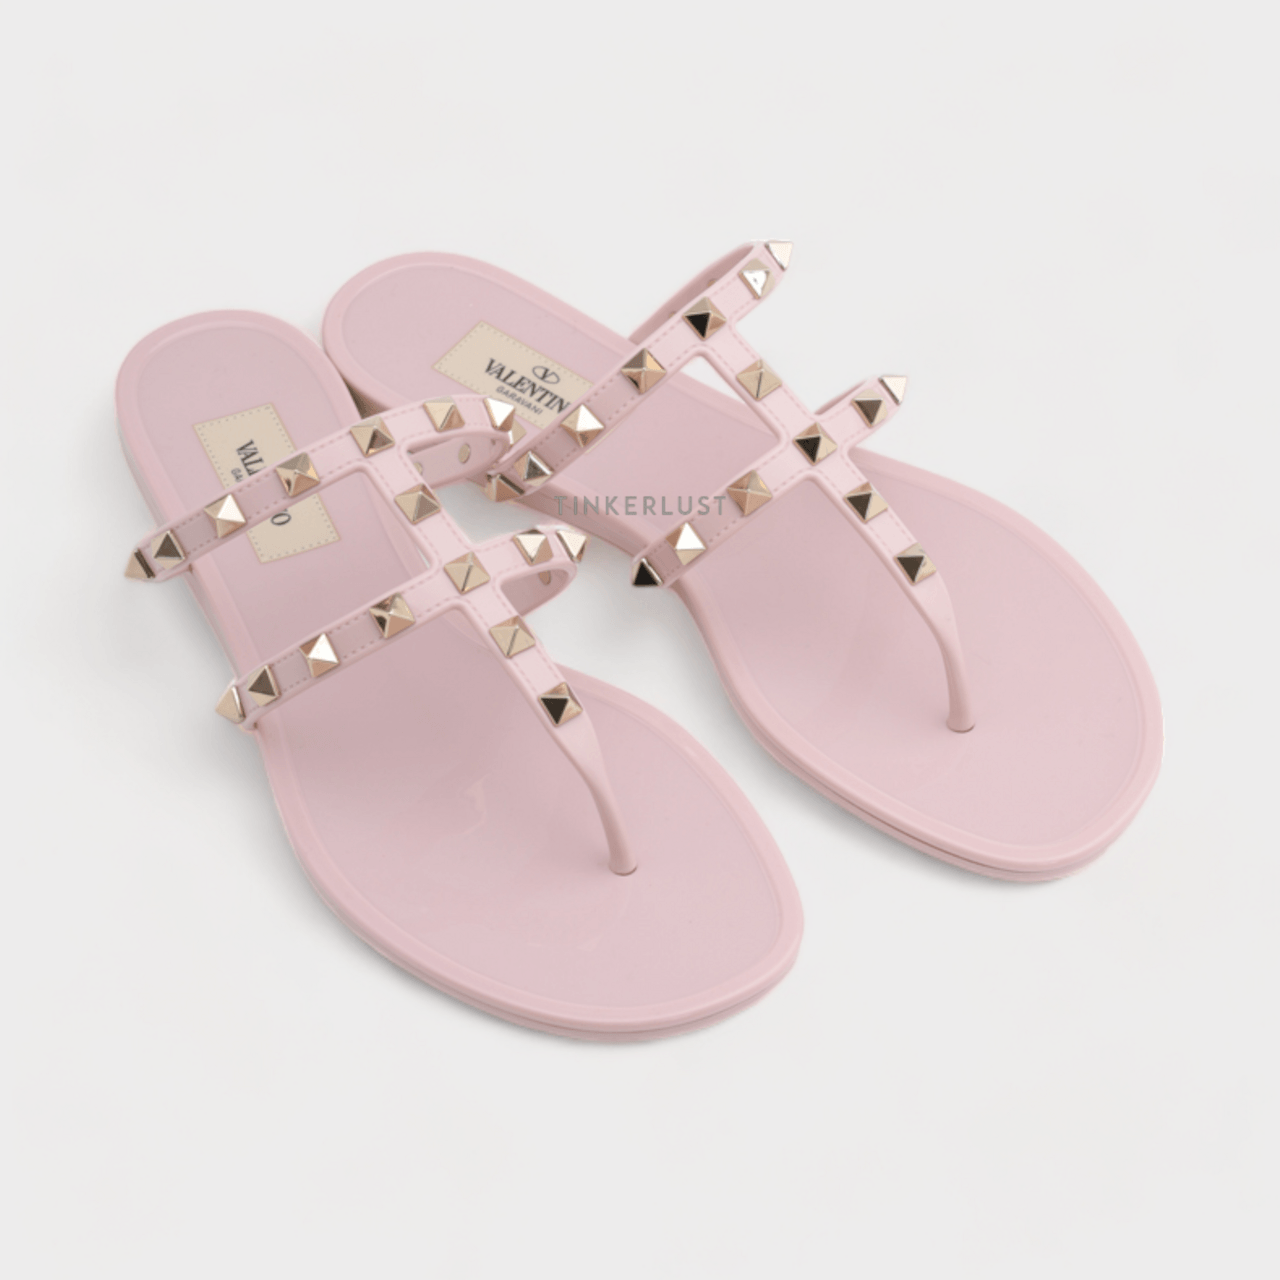 VALENTINO Rockstud Flat Rubber Sandals in Water Rose